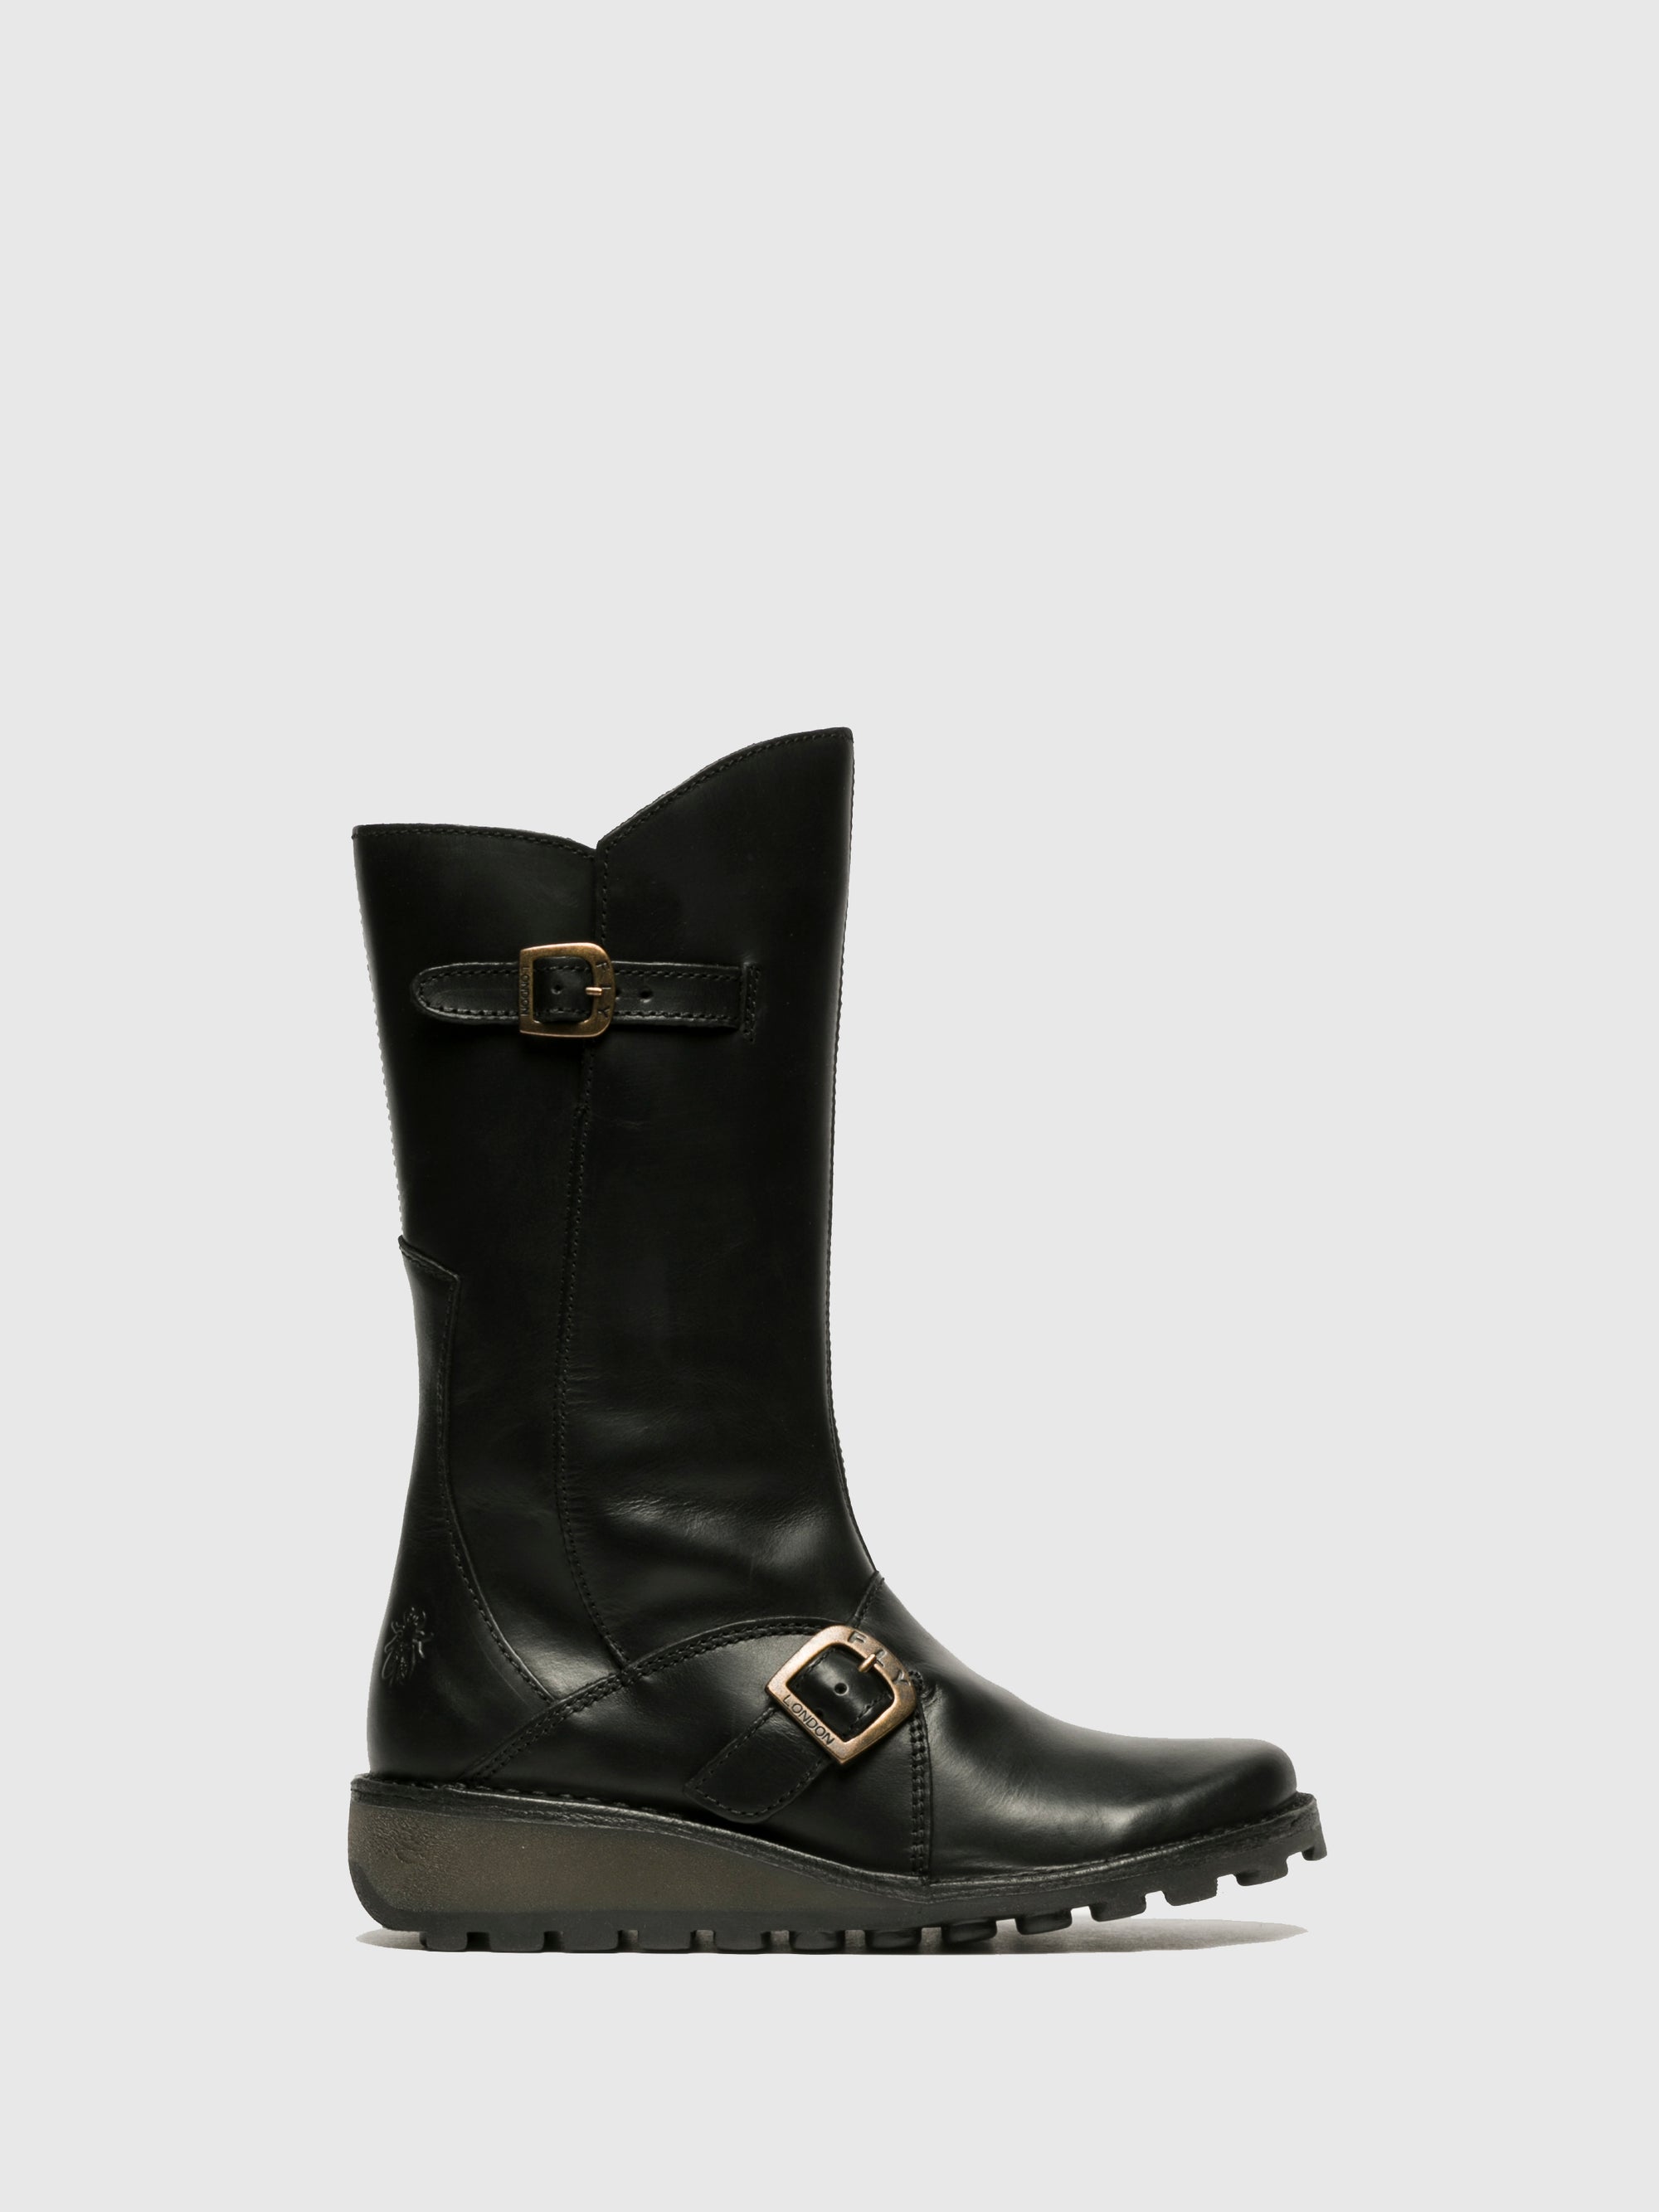 Fly London Black Buckle Boots